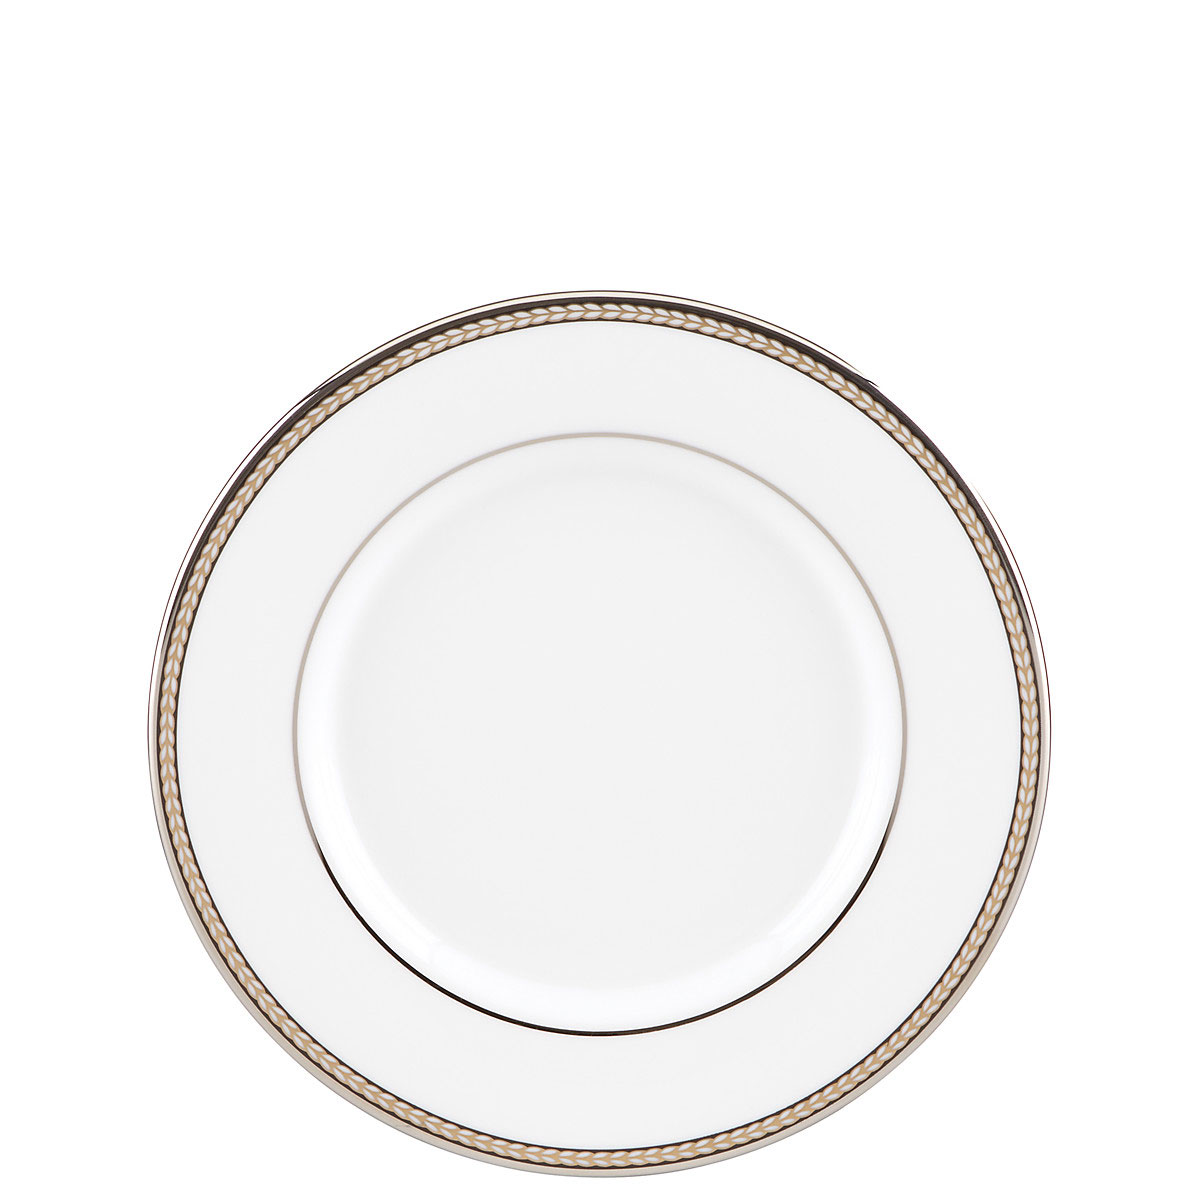 Kate Spade China by Lenox, Sonora Knot Saucer